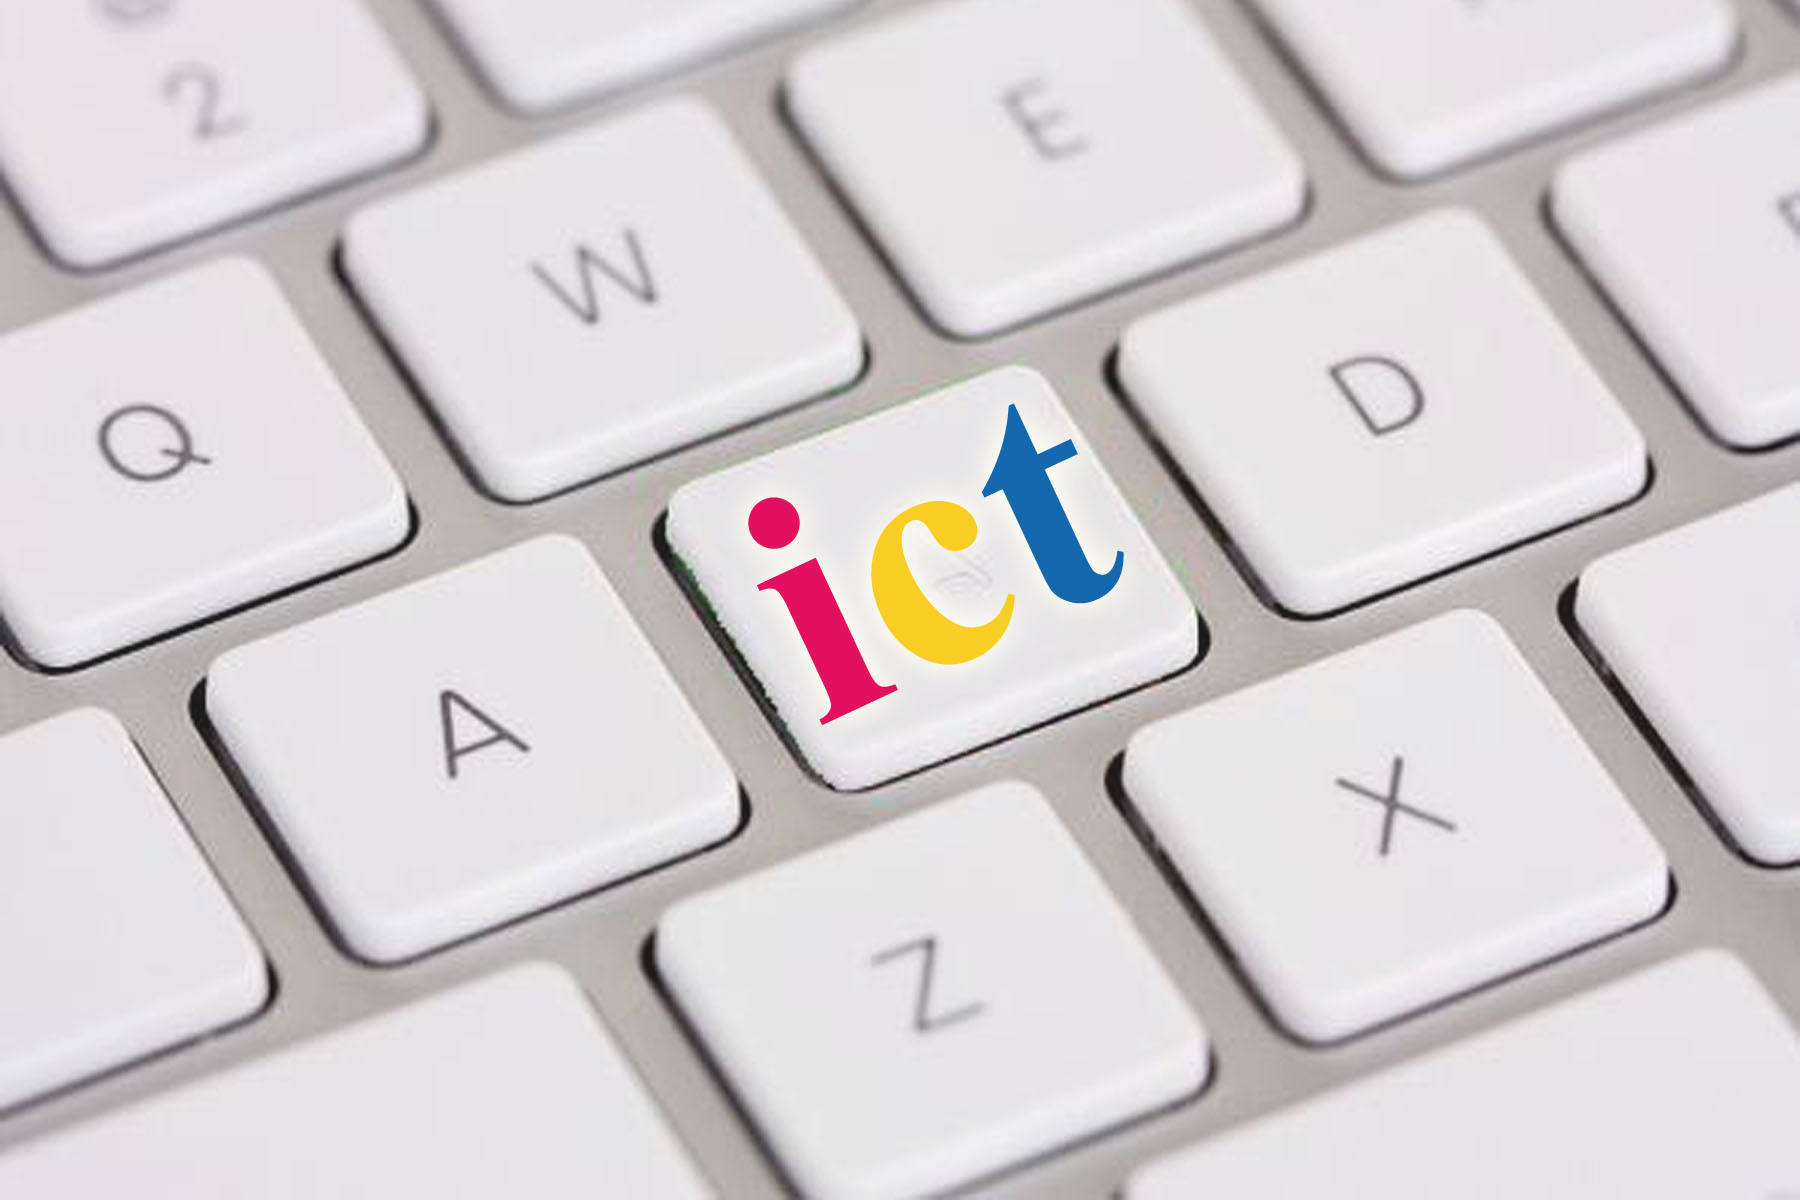 Download FREE ICT Computer Science Computer Image Clipart 